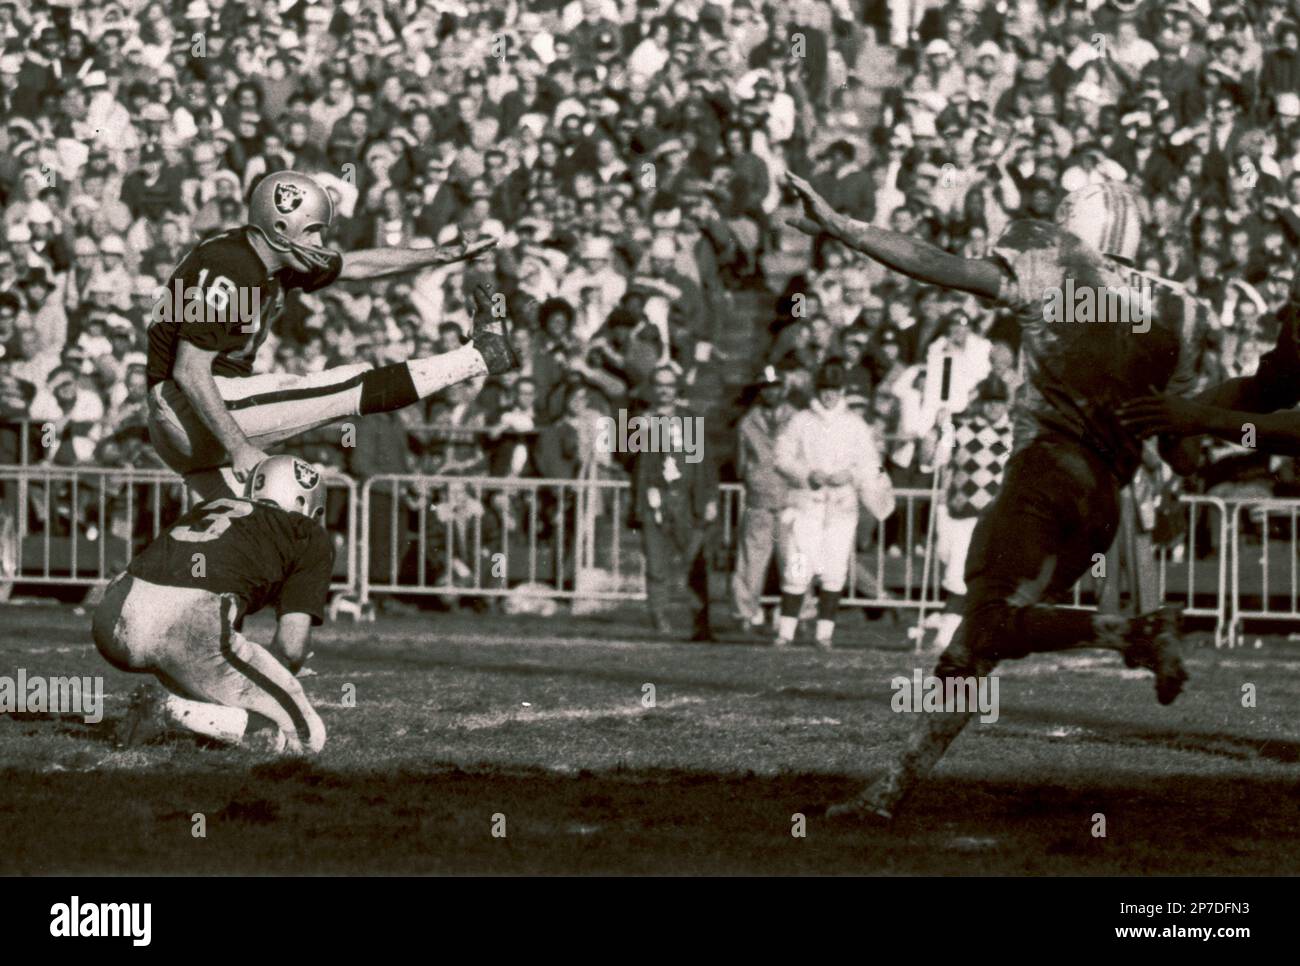 The Oakland Raiders played the Miami Dolphins September 23, 1973